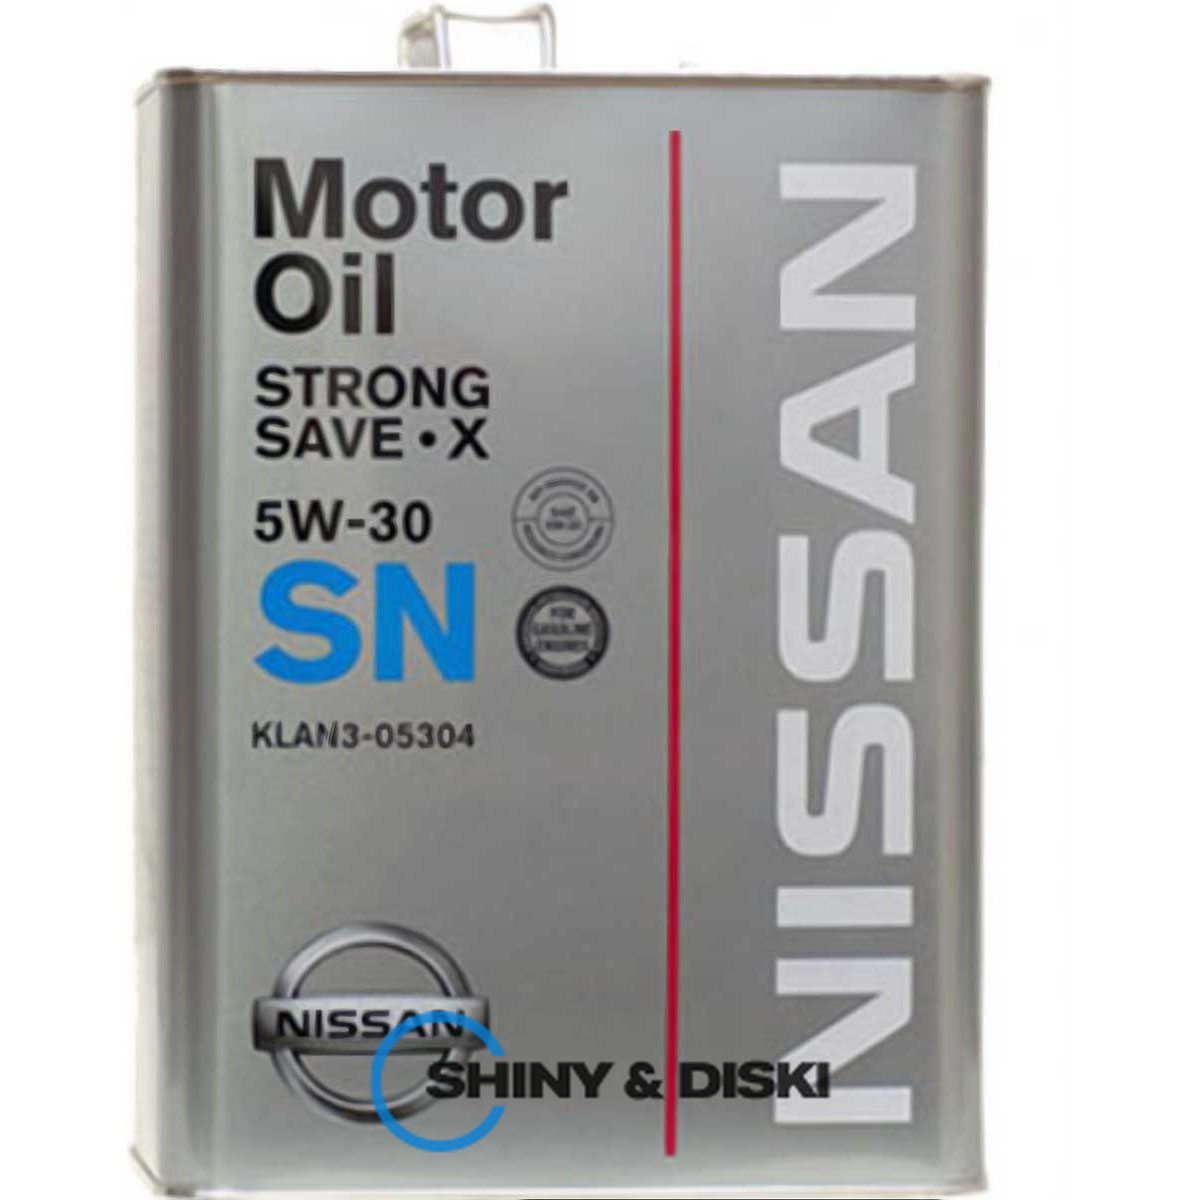 nissan sn strong save x